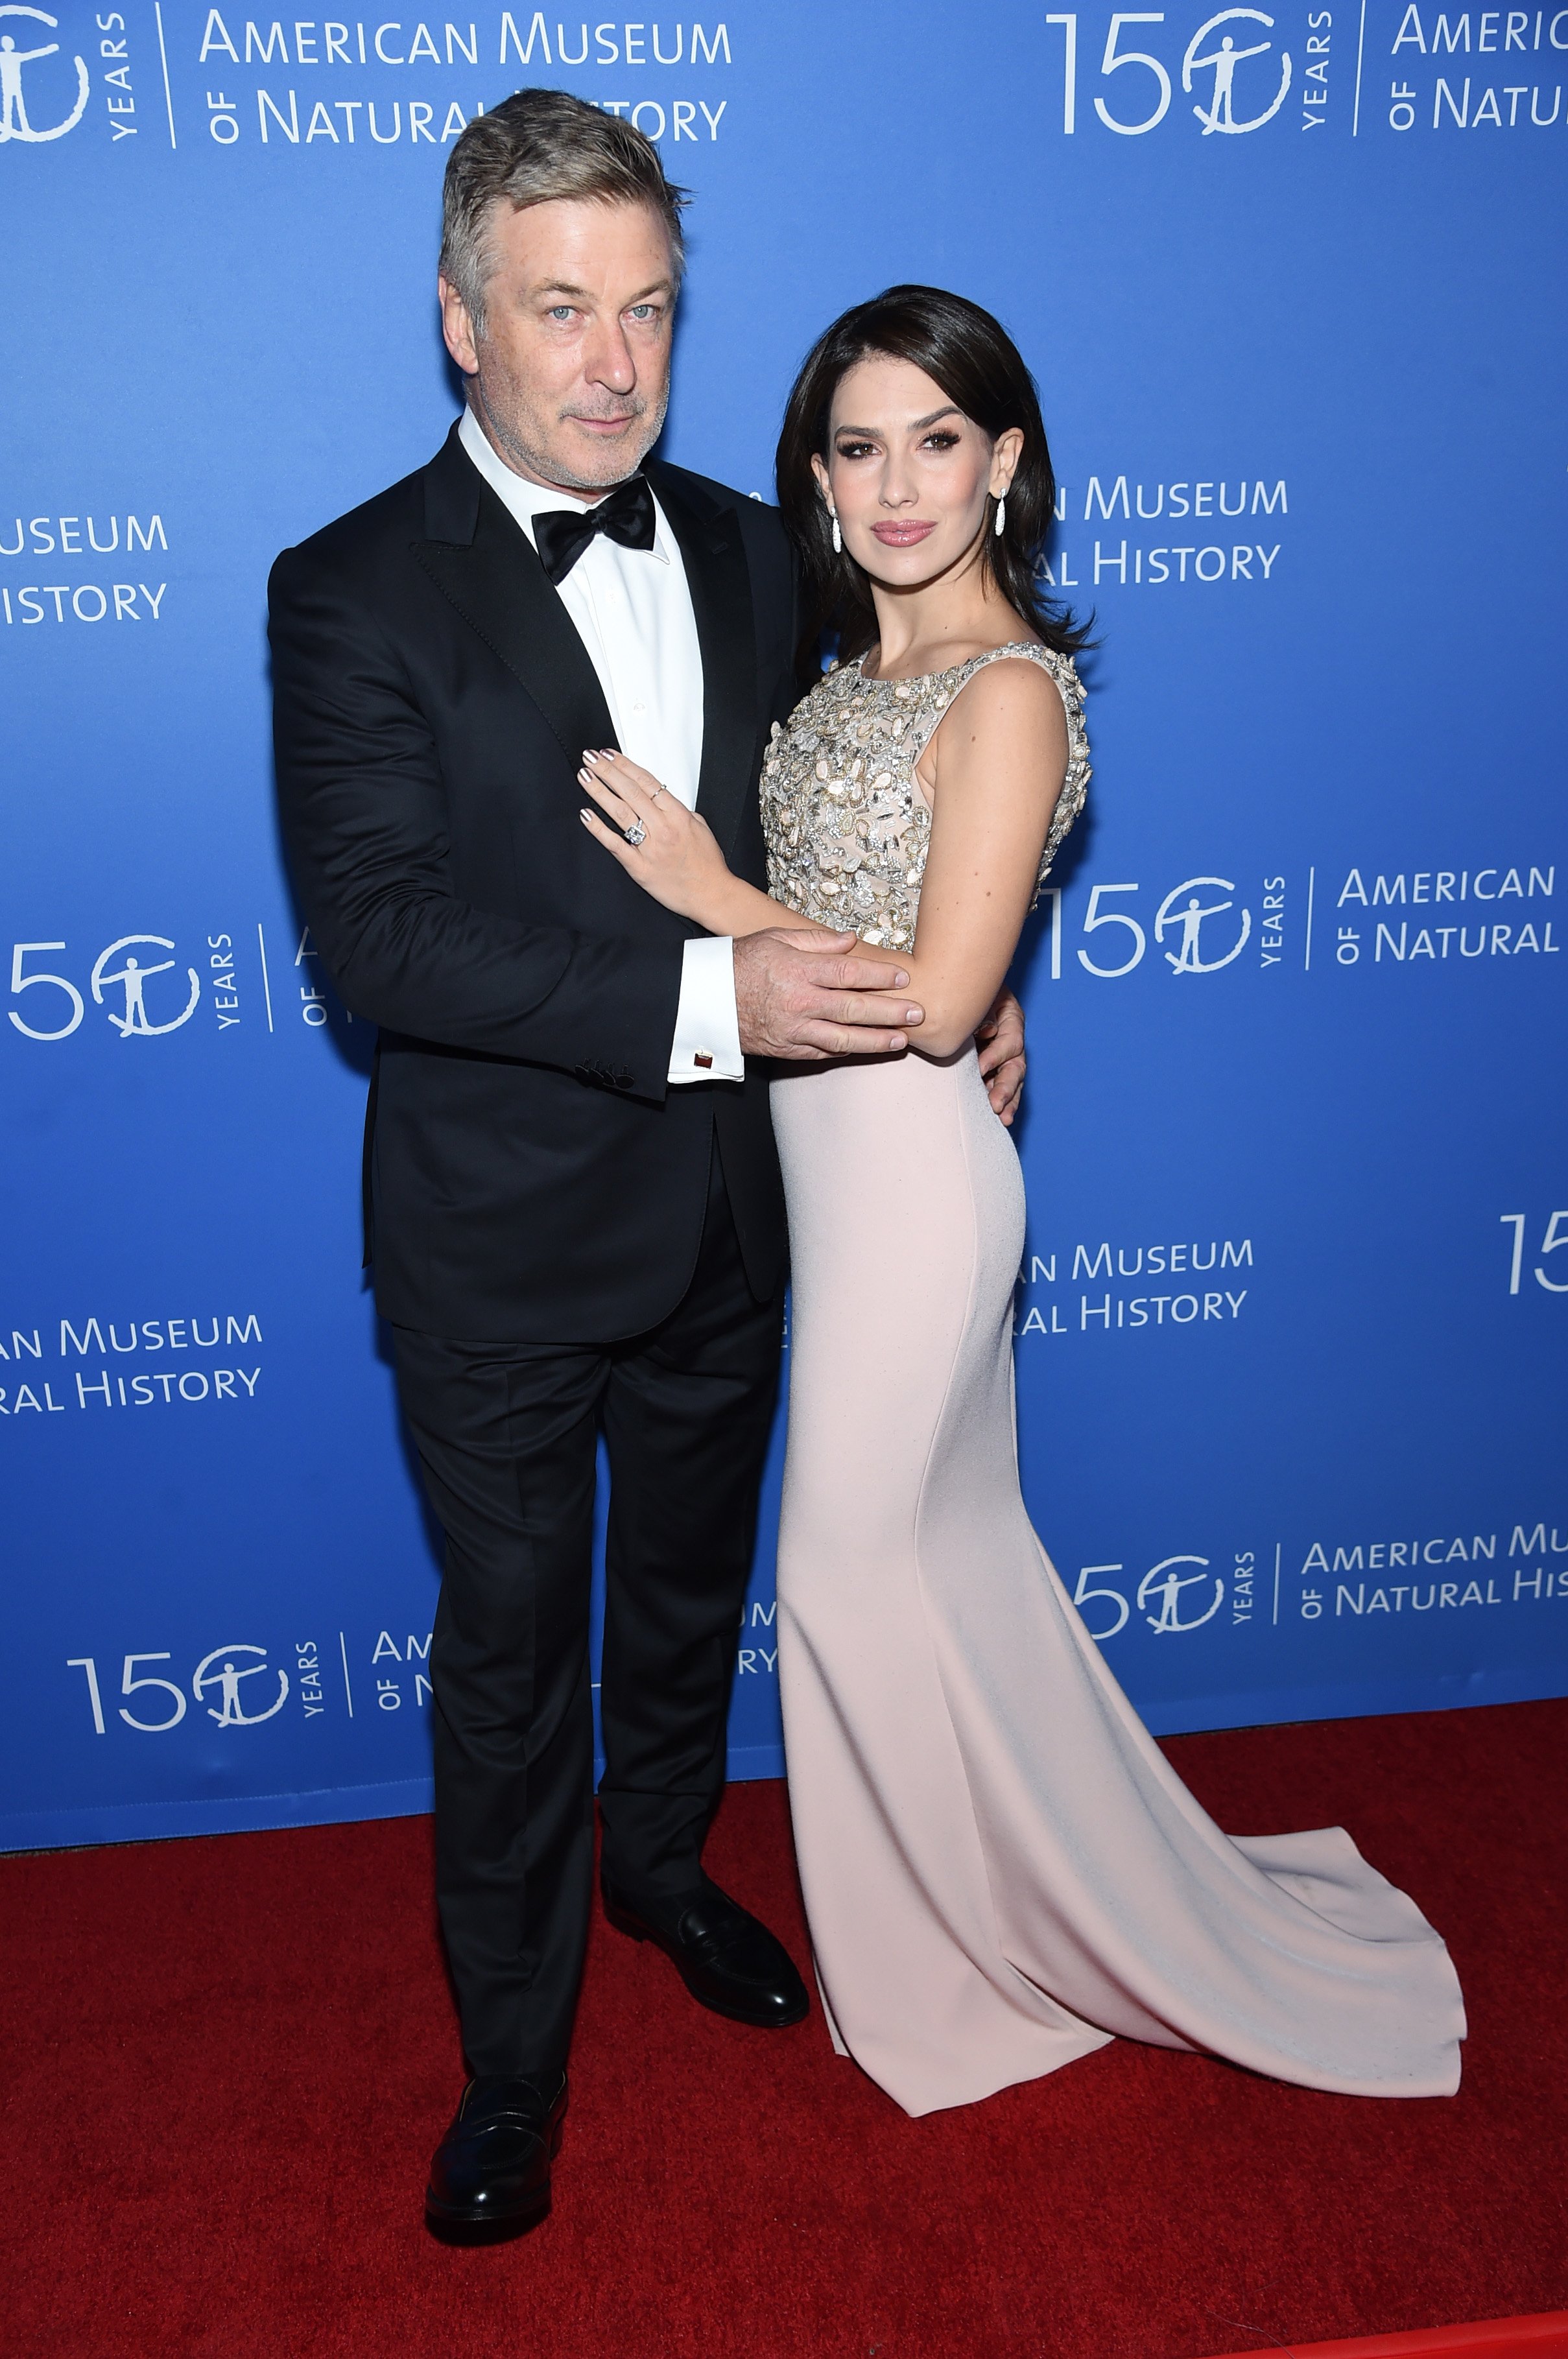 Alec and Hilaria Baldwin attend the American Museum of Natural History Gala in New York City on November 21, 2019 | Photo: Getty Images